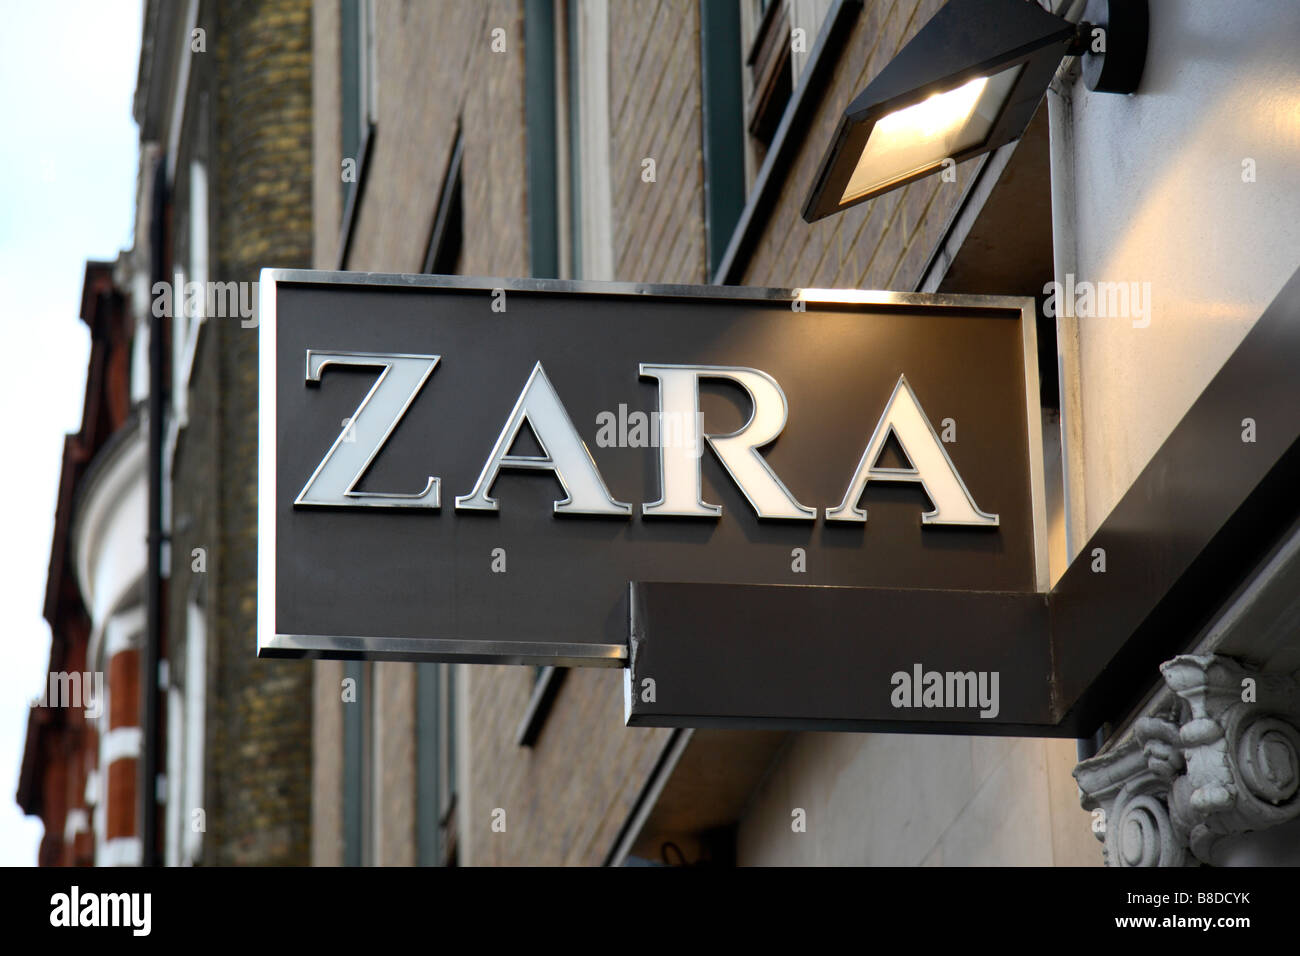 A sign outside the Zara clothing shop, Covent Garden, London. Jan 2009 ...